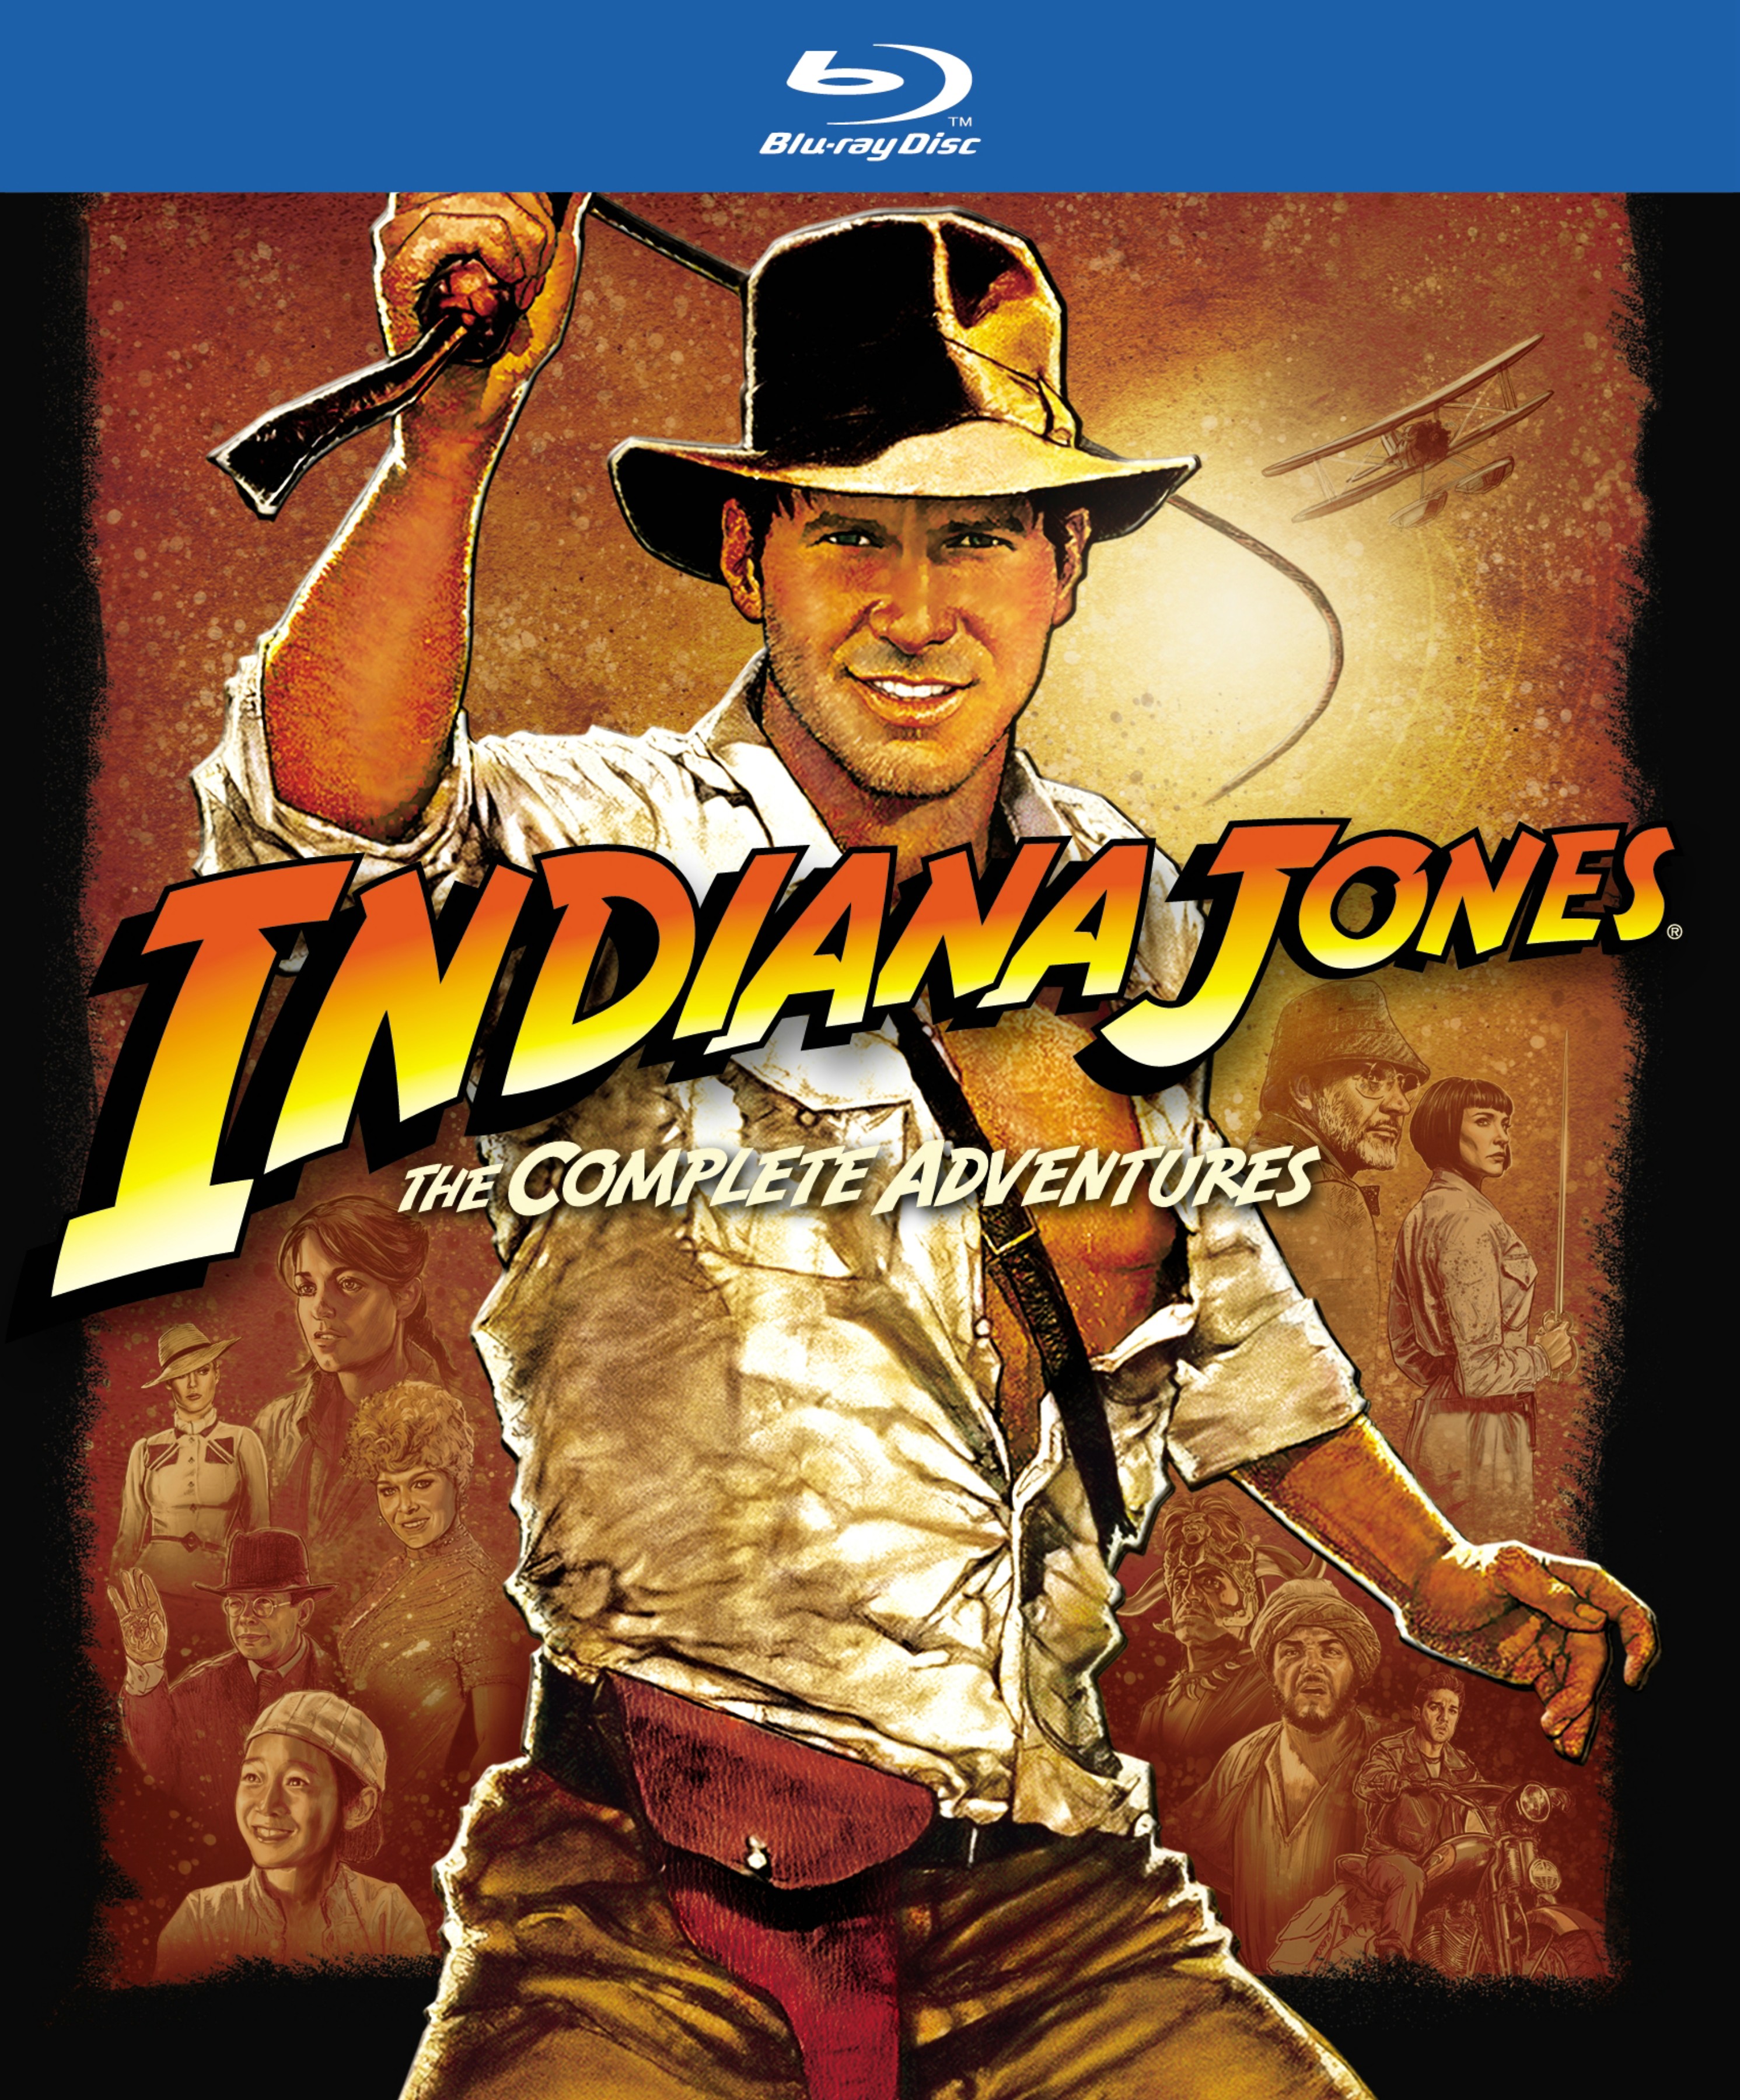 INDIANA JONES IMAX Experience: Win tickets and INDIANA JONES: The Complete Series on Blu-ray™